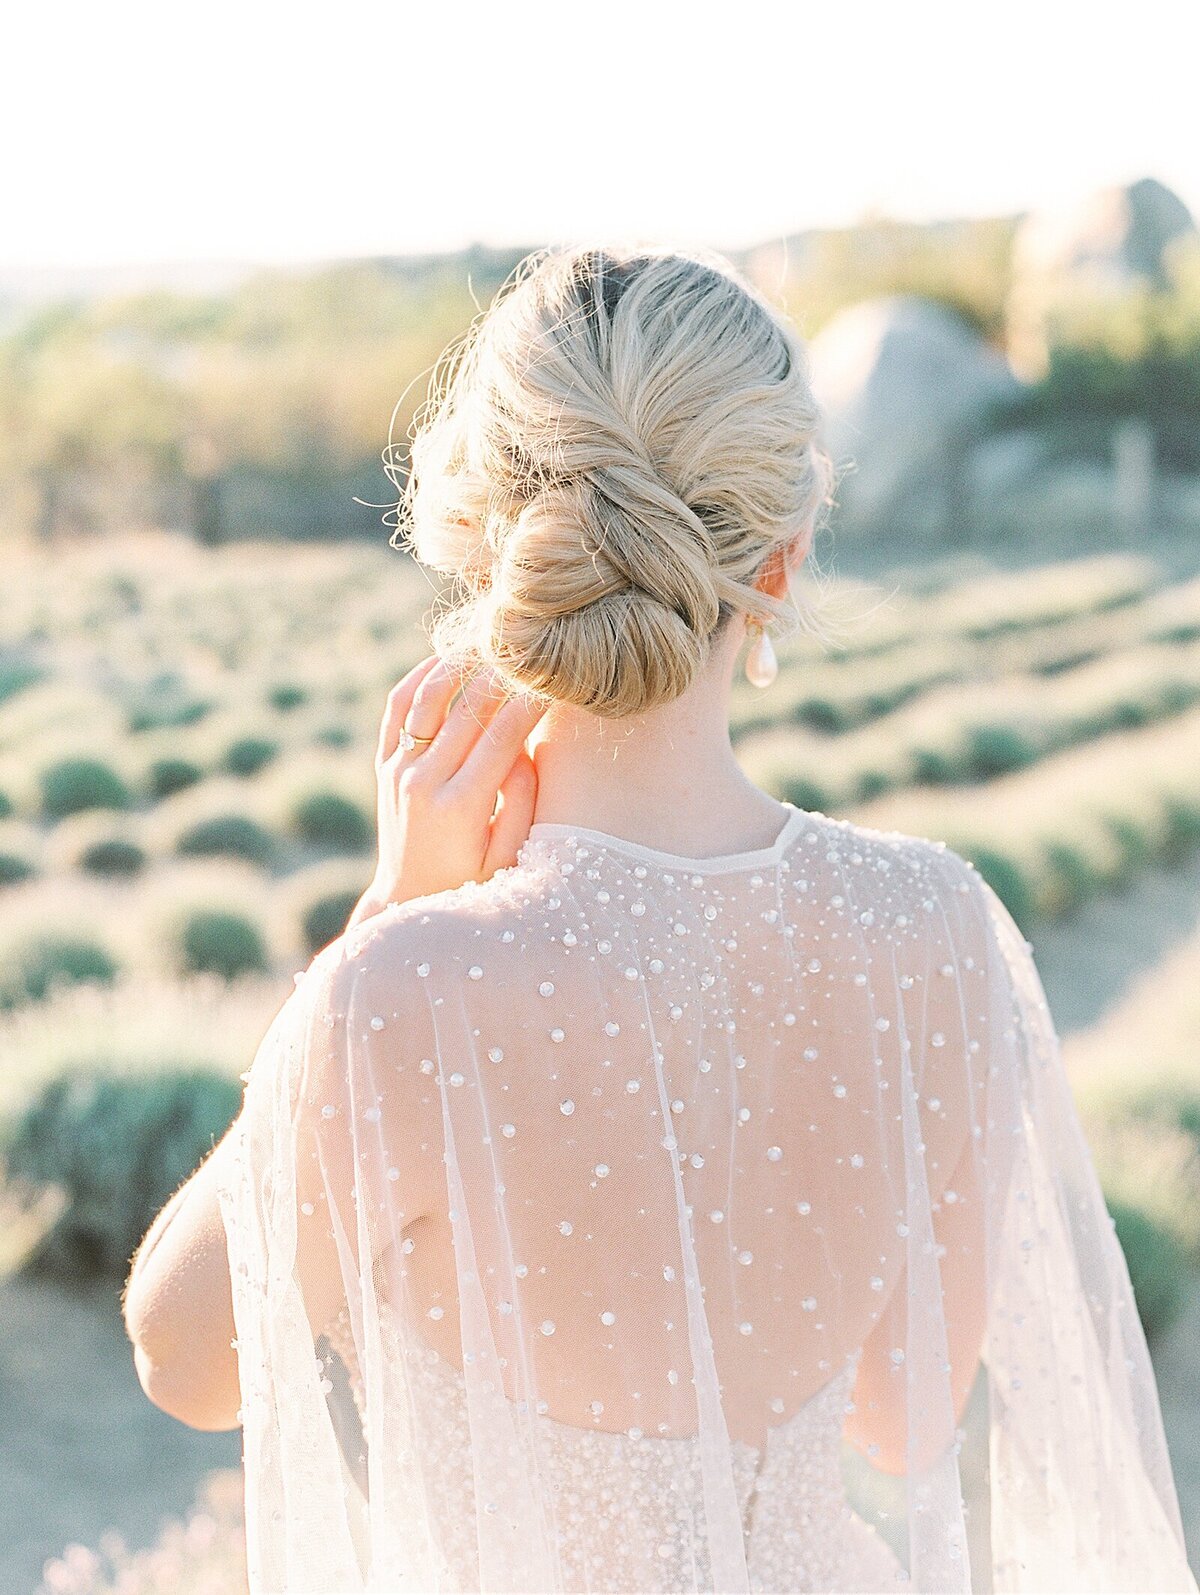 Bridal Editorial Photoshoot at the Lavender Fields in Fork and Plow Lavender Farms by Lisa Riley Photography based in La Jolla, California.